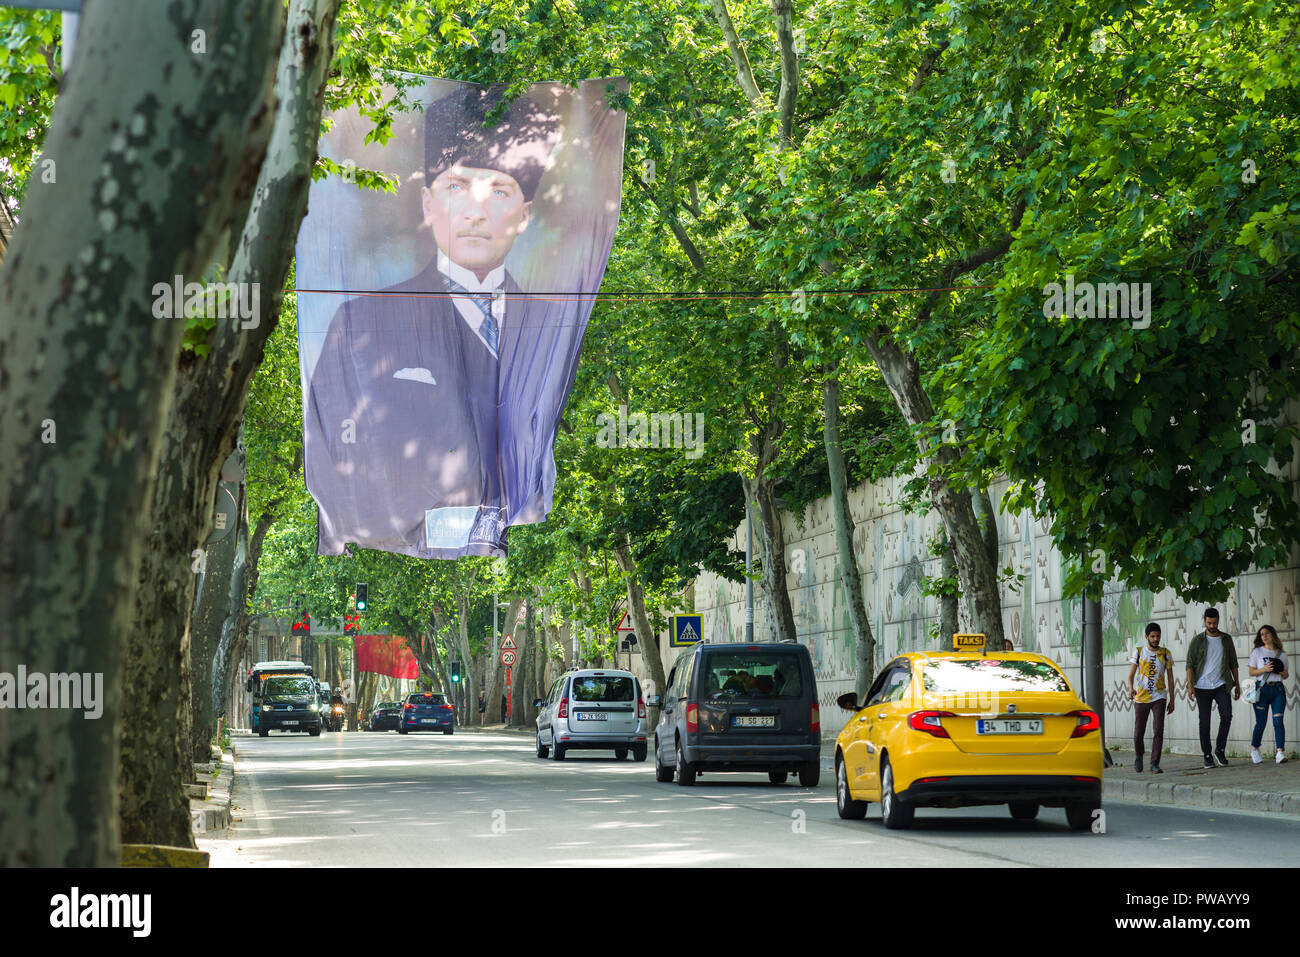 A large flag with Mustafa Kemal Atatürk printed on it waves above a tree lined avenue with vehicles driving on it, Istanbul, Turkey Stock Photo